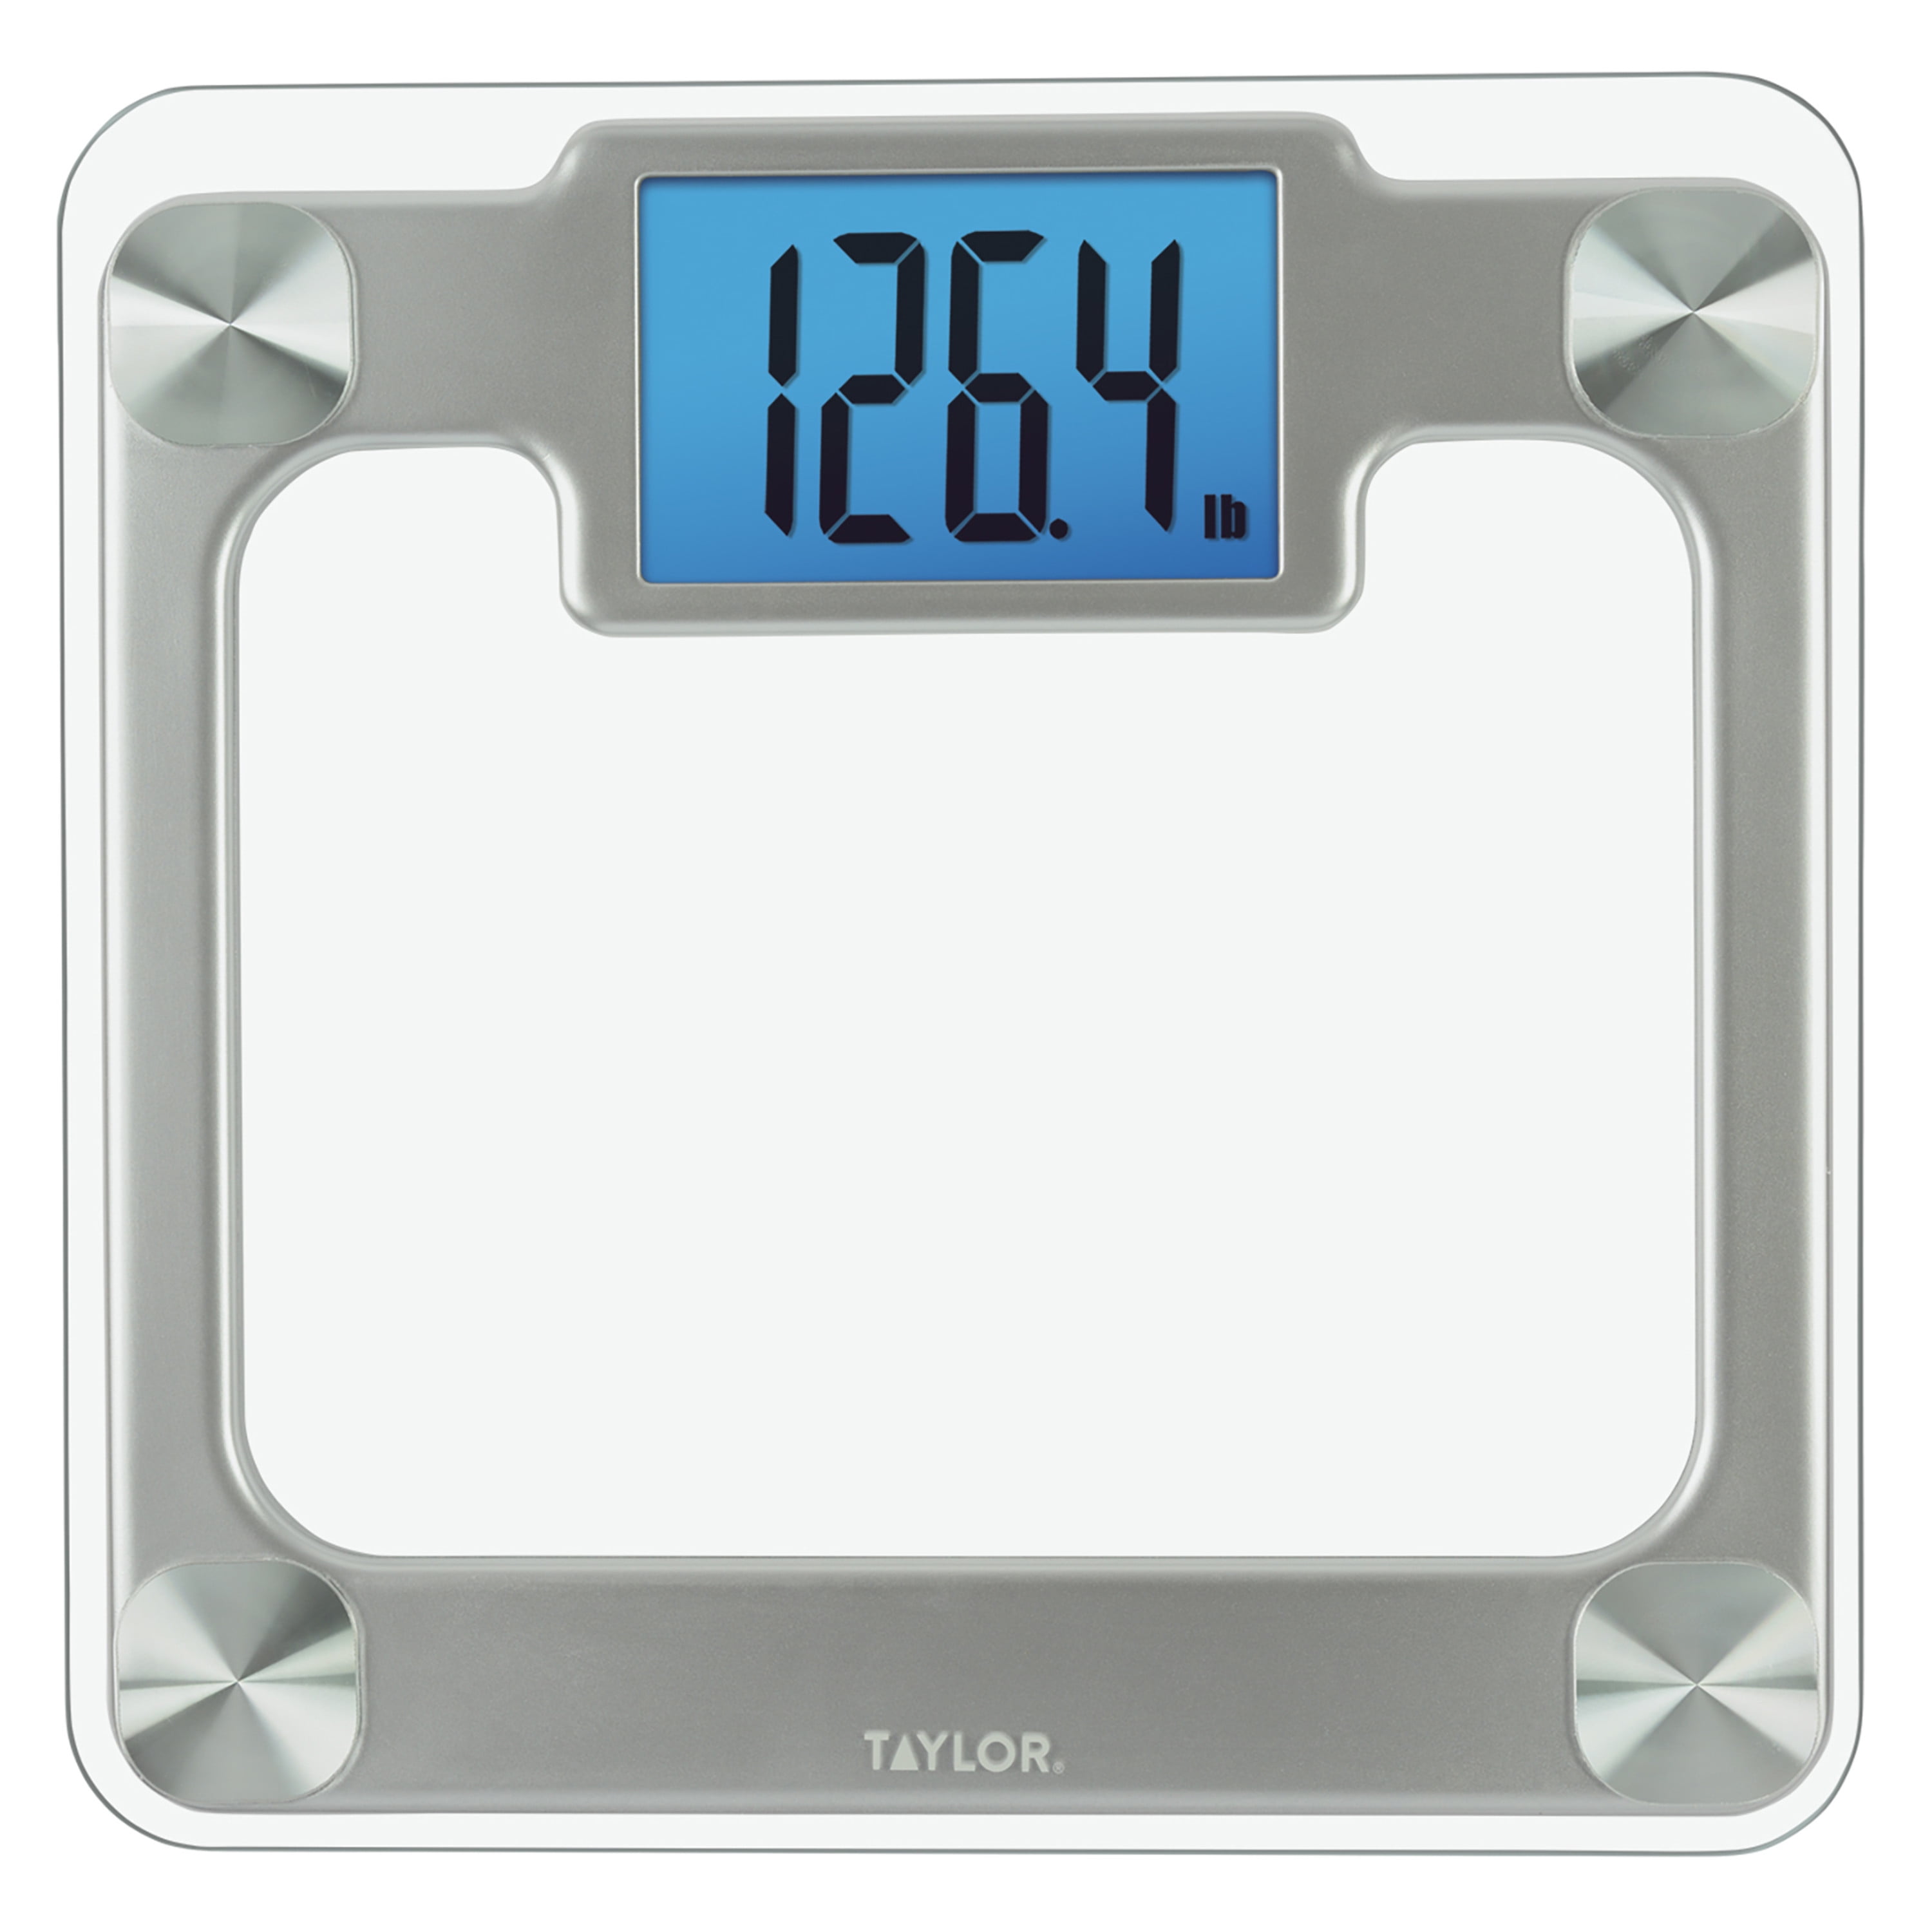 Taylor Precision 5283752 Glass Bath Scale with Magic Display, 440